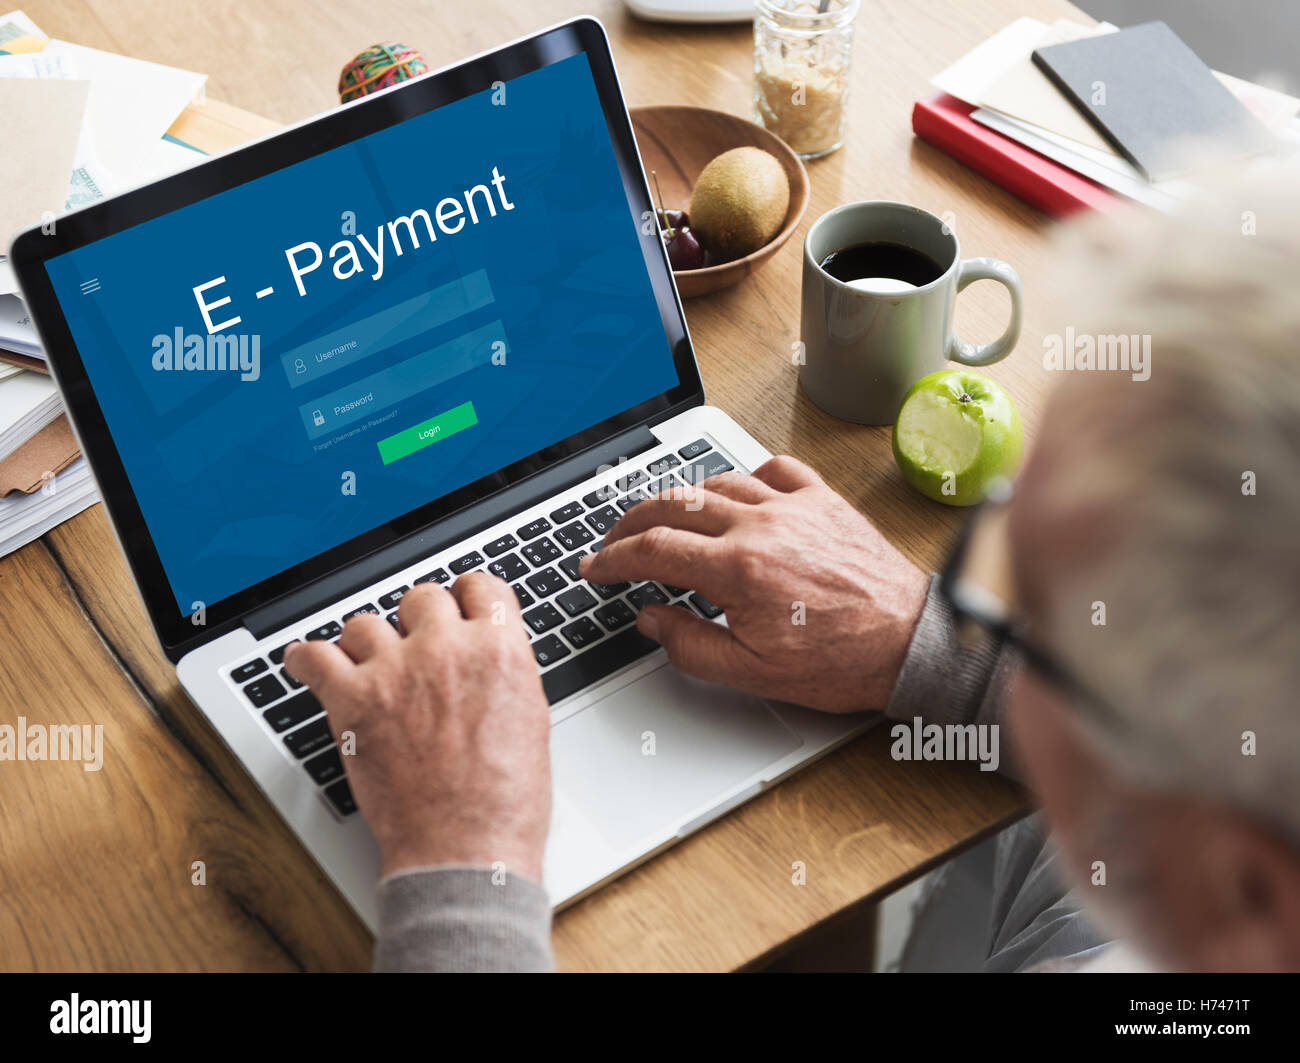 E-Payment Internet Banking Technology Concept Stock Photo